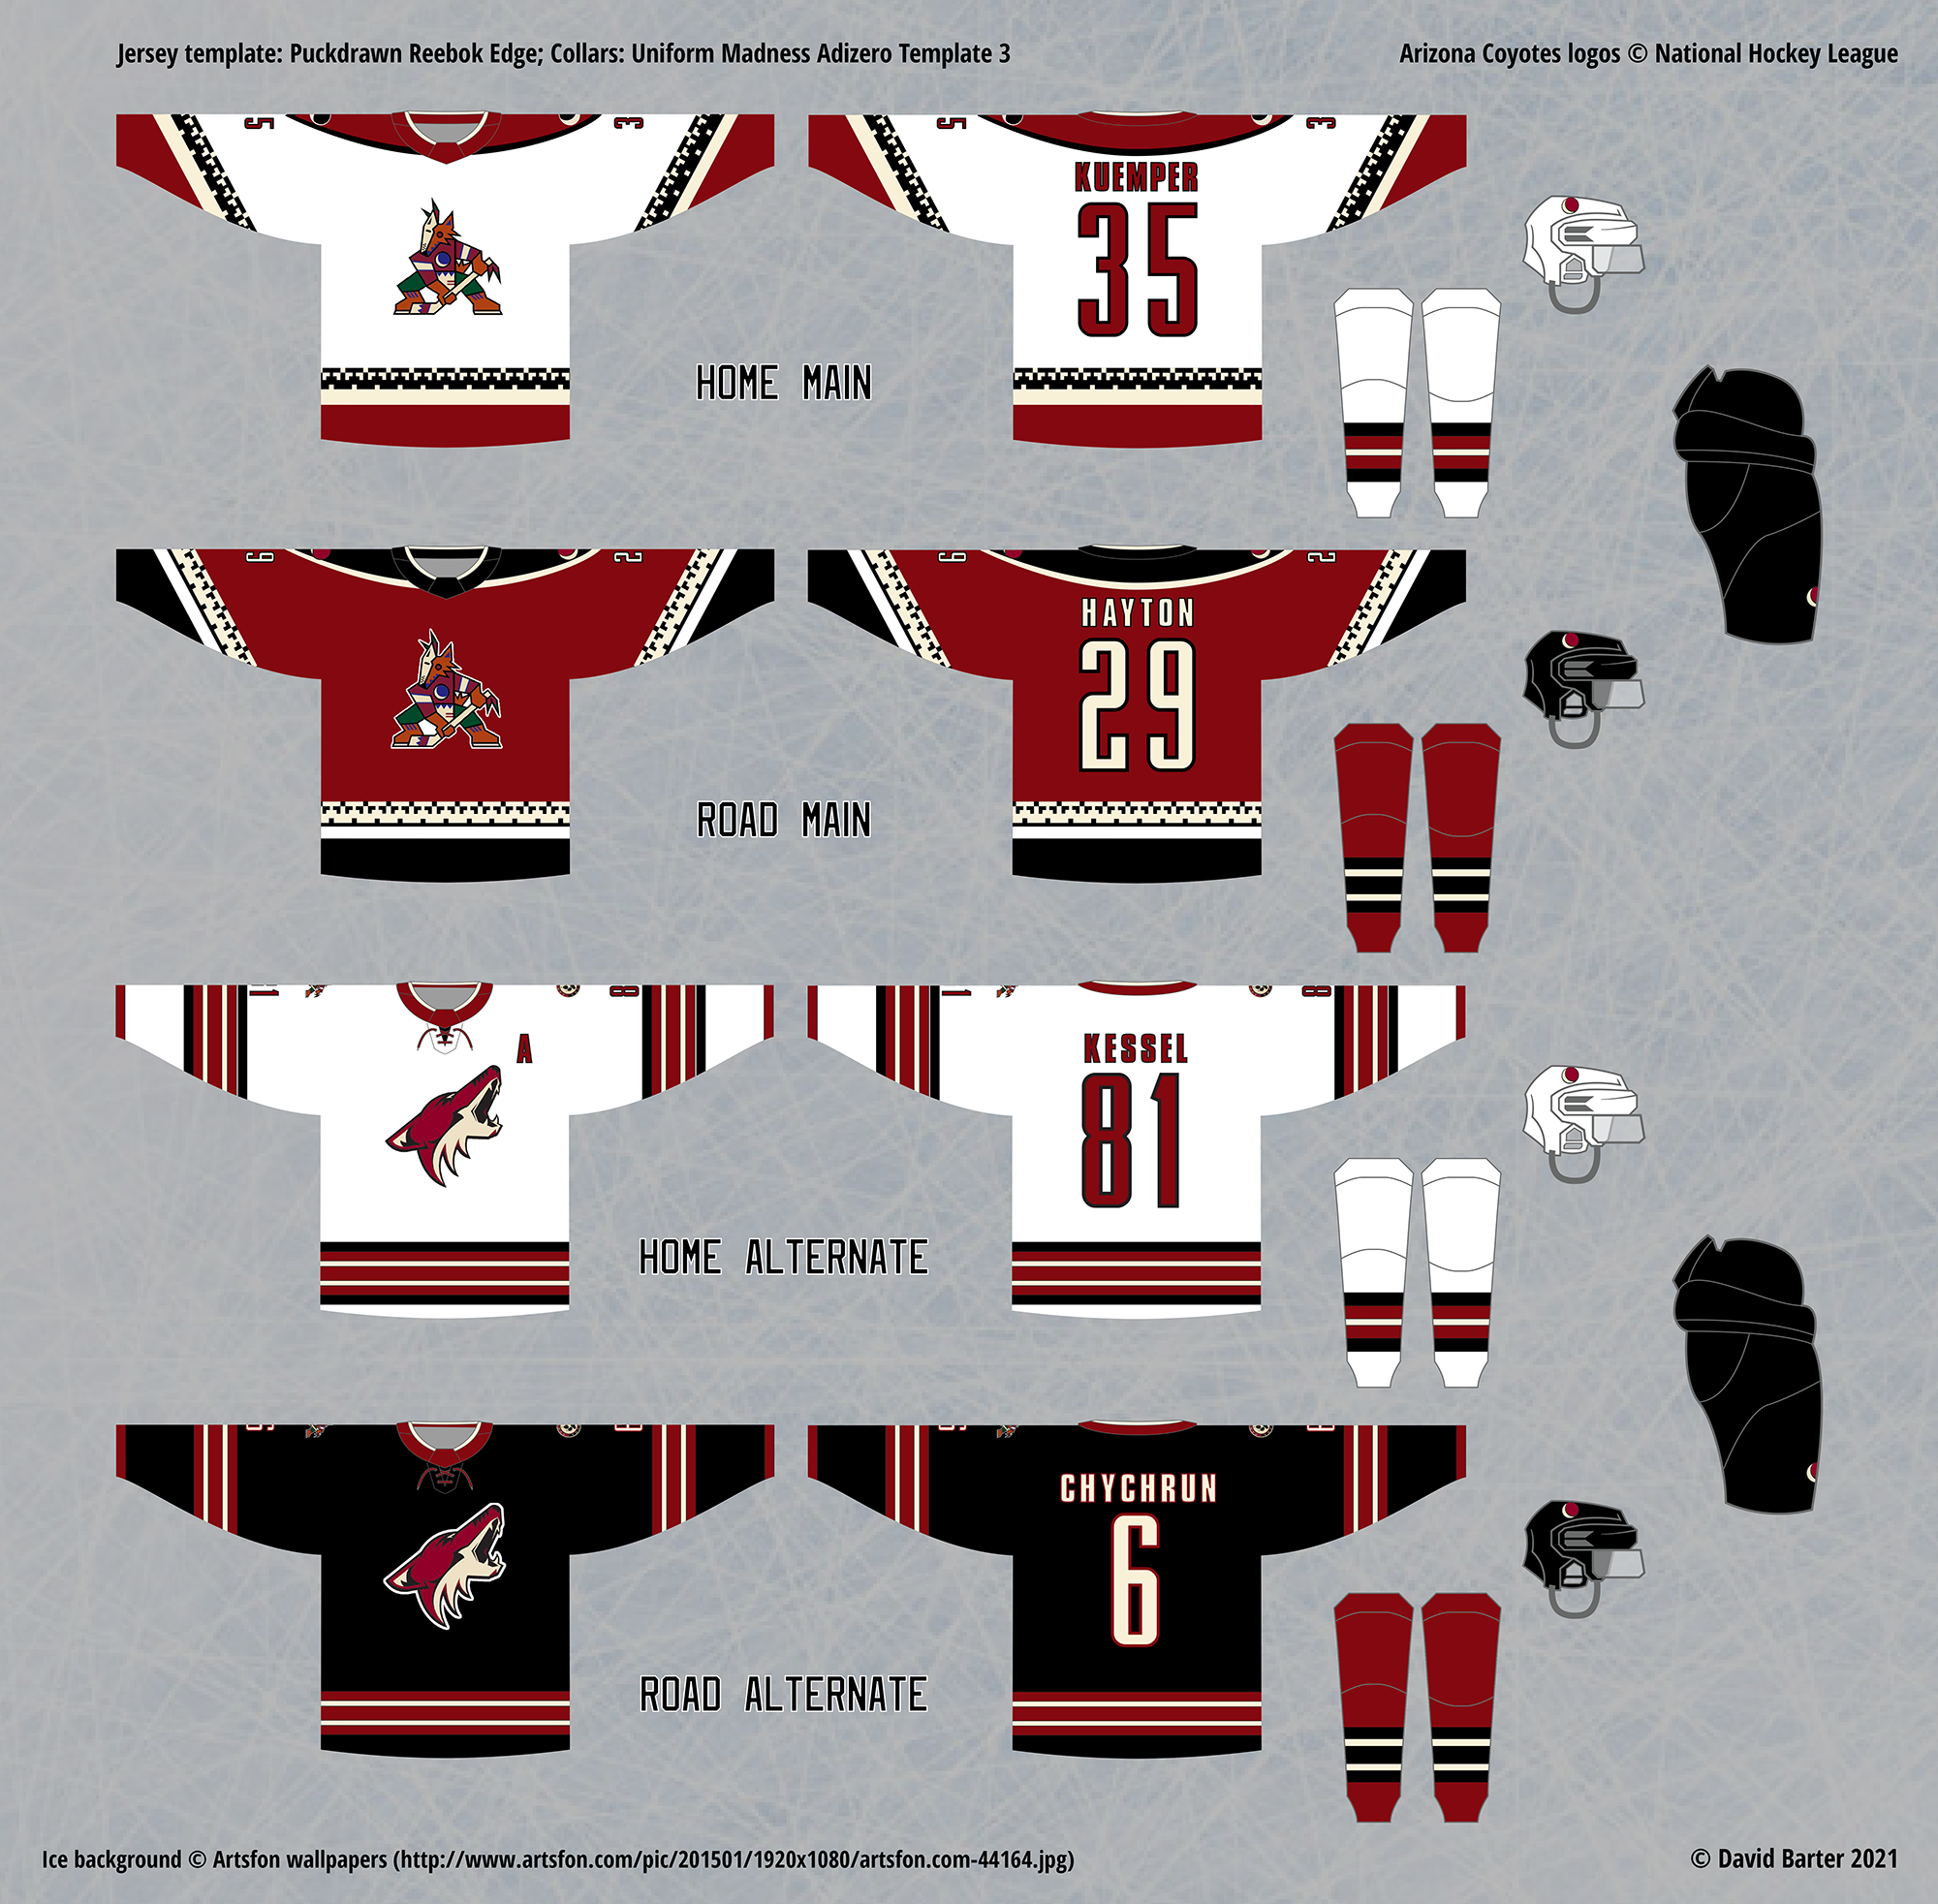 Coyotes jersey concept combining the Kachina with the more recent